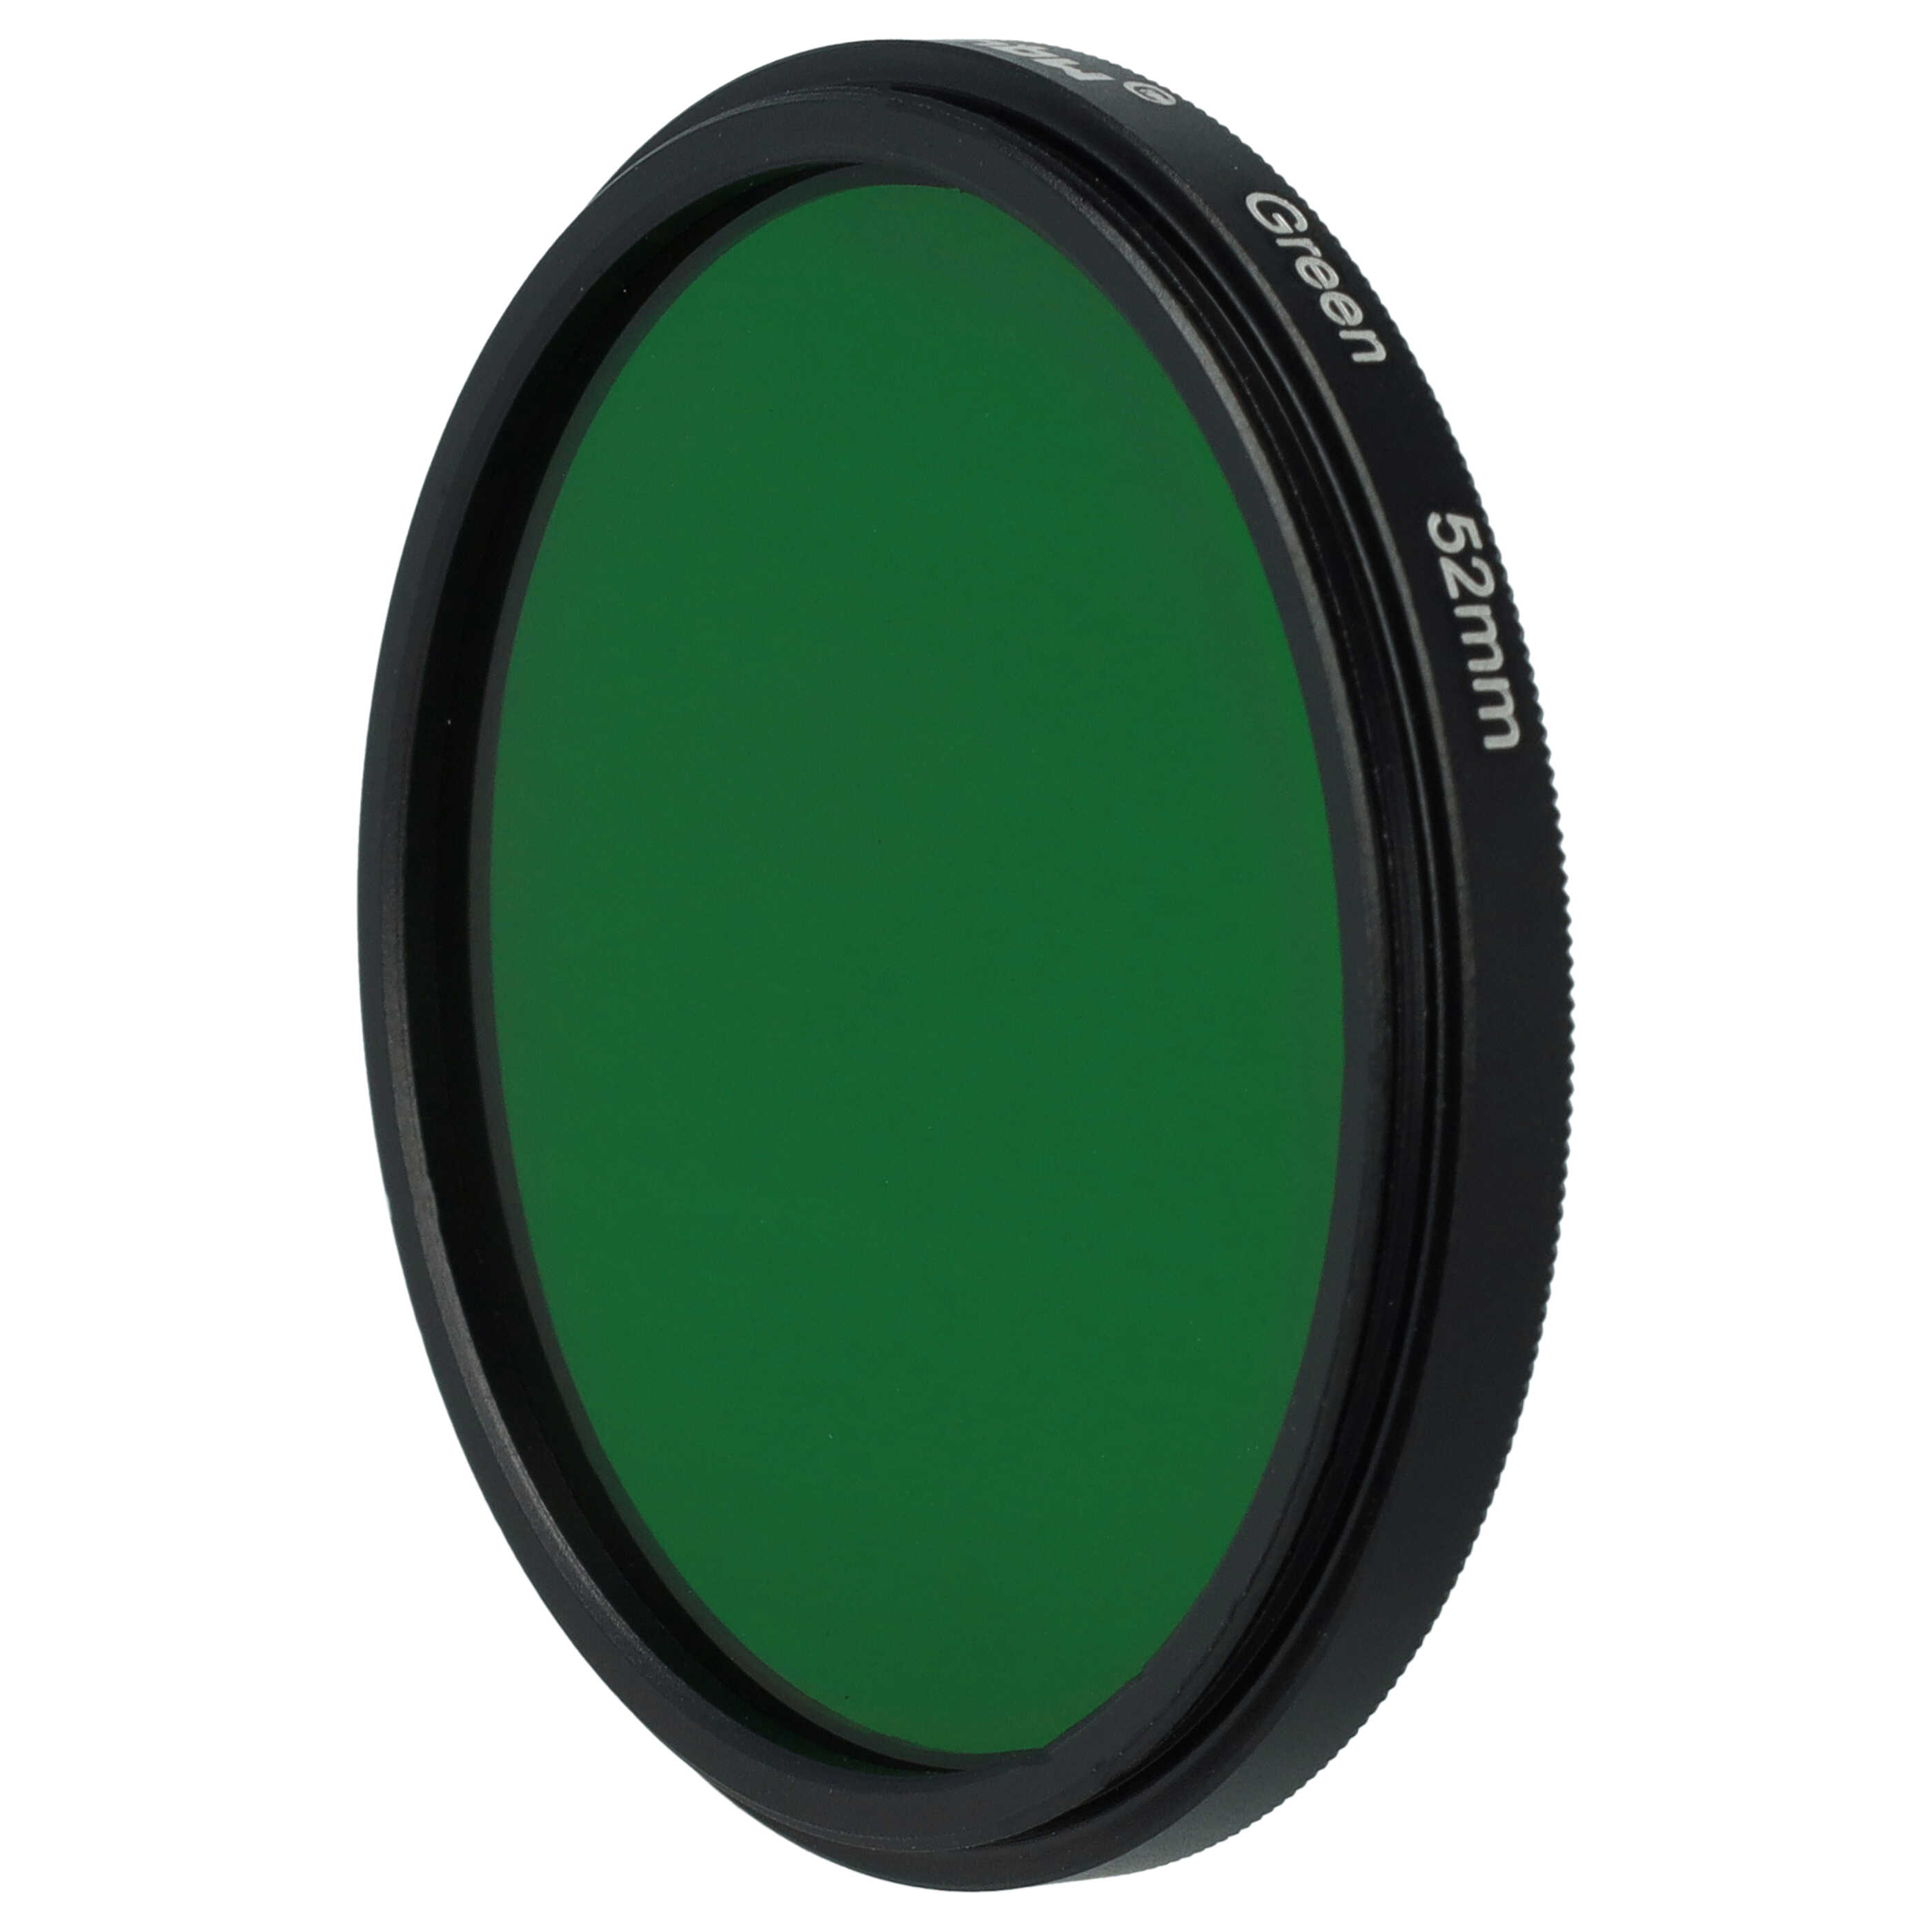 Coloured Filter, Green suitable for Camera Lenses with 52 mm Filter Thread - Green Filter